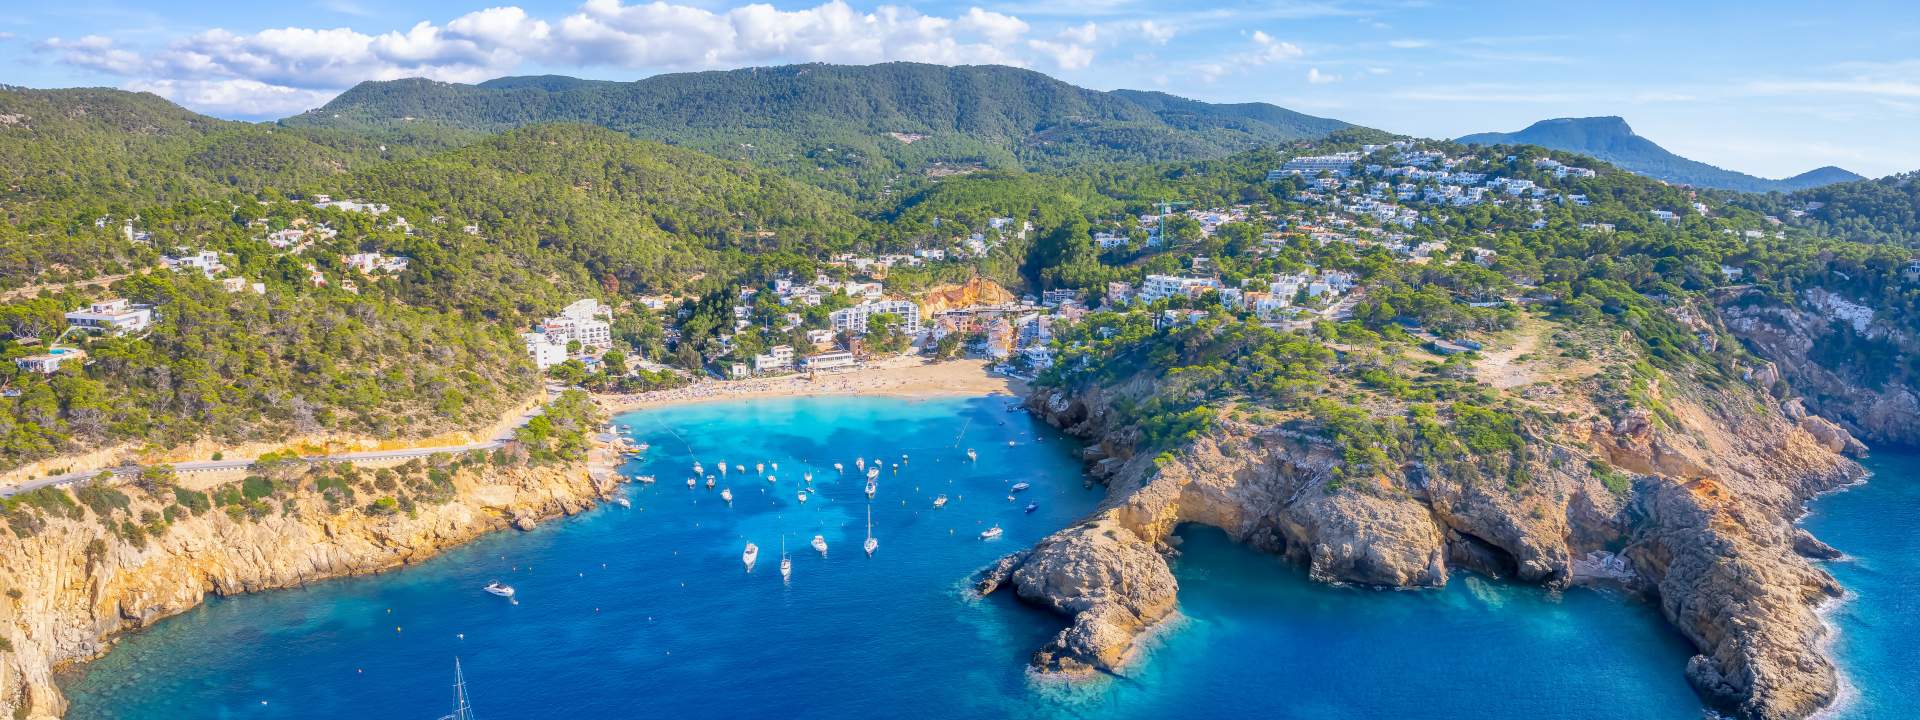 Ibiza, a lively island with mysterious and dazzling coves